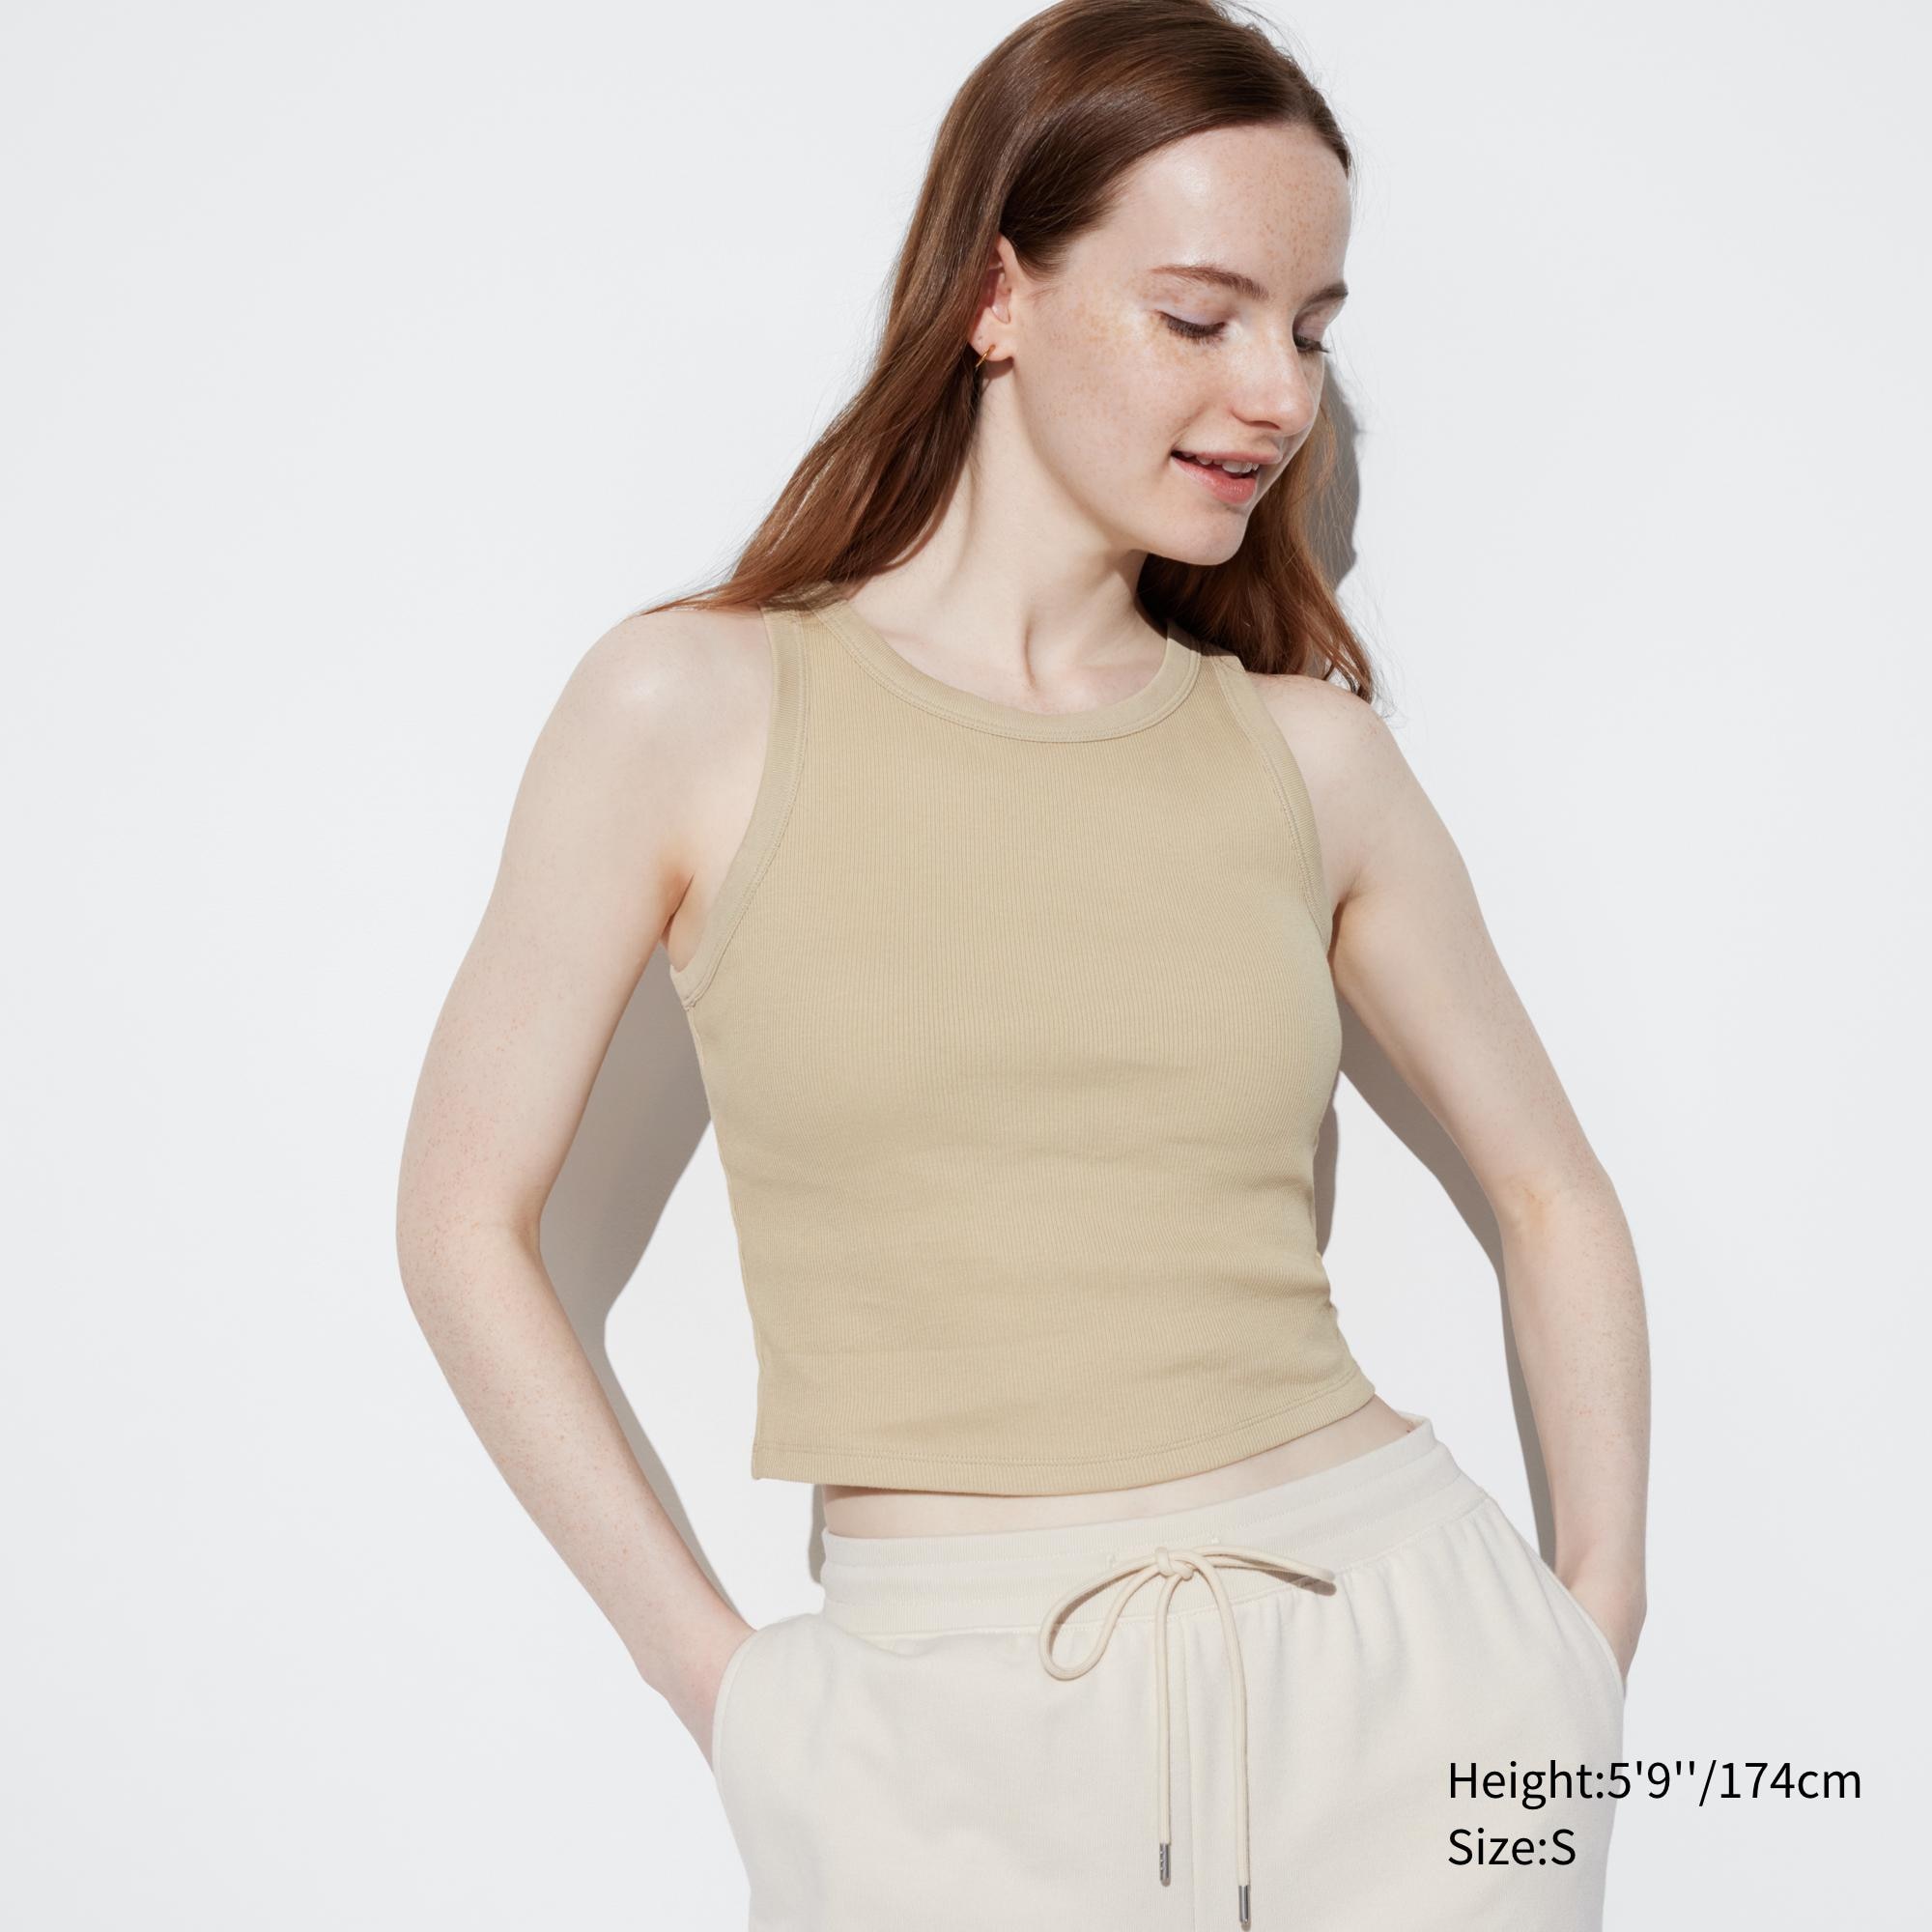 Check styling ideas for「Ribbed Cropped Sleeveless Bra Top」